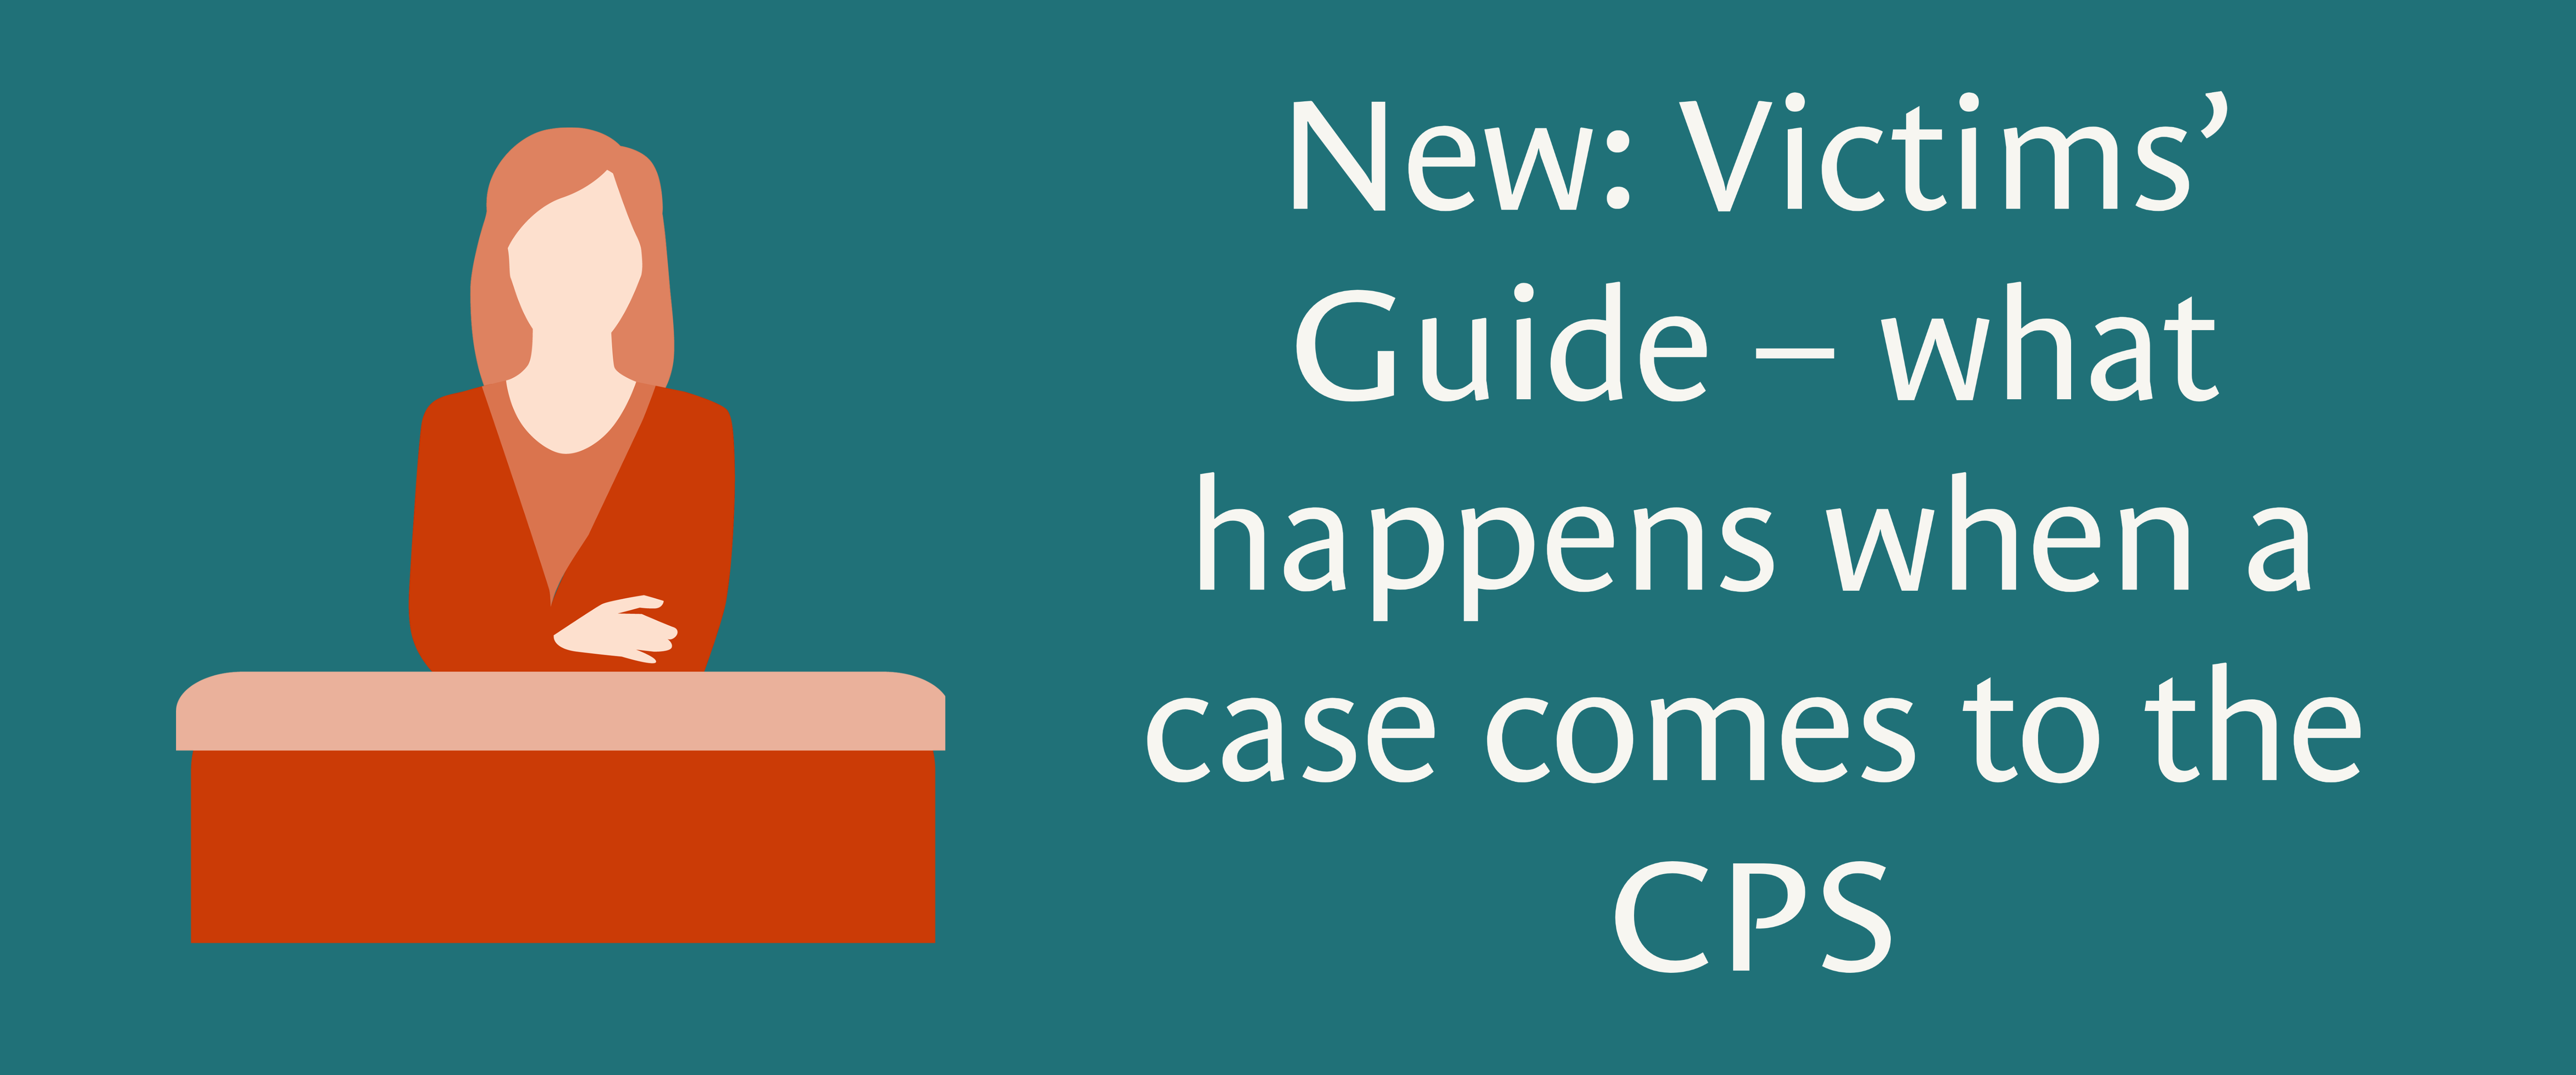 Graphic showing a person in the witness box of a court. Text reads New: Victims' Guide - what happens when a case comes to the CPS